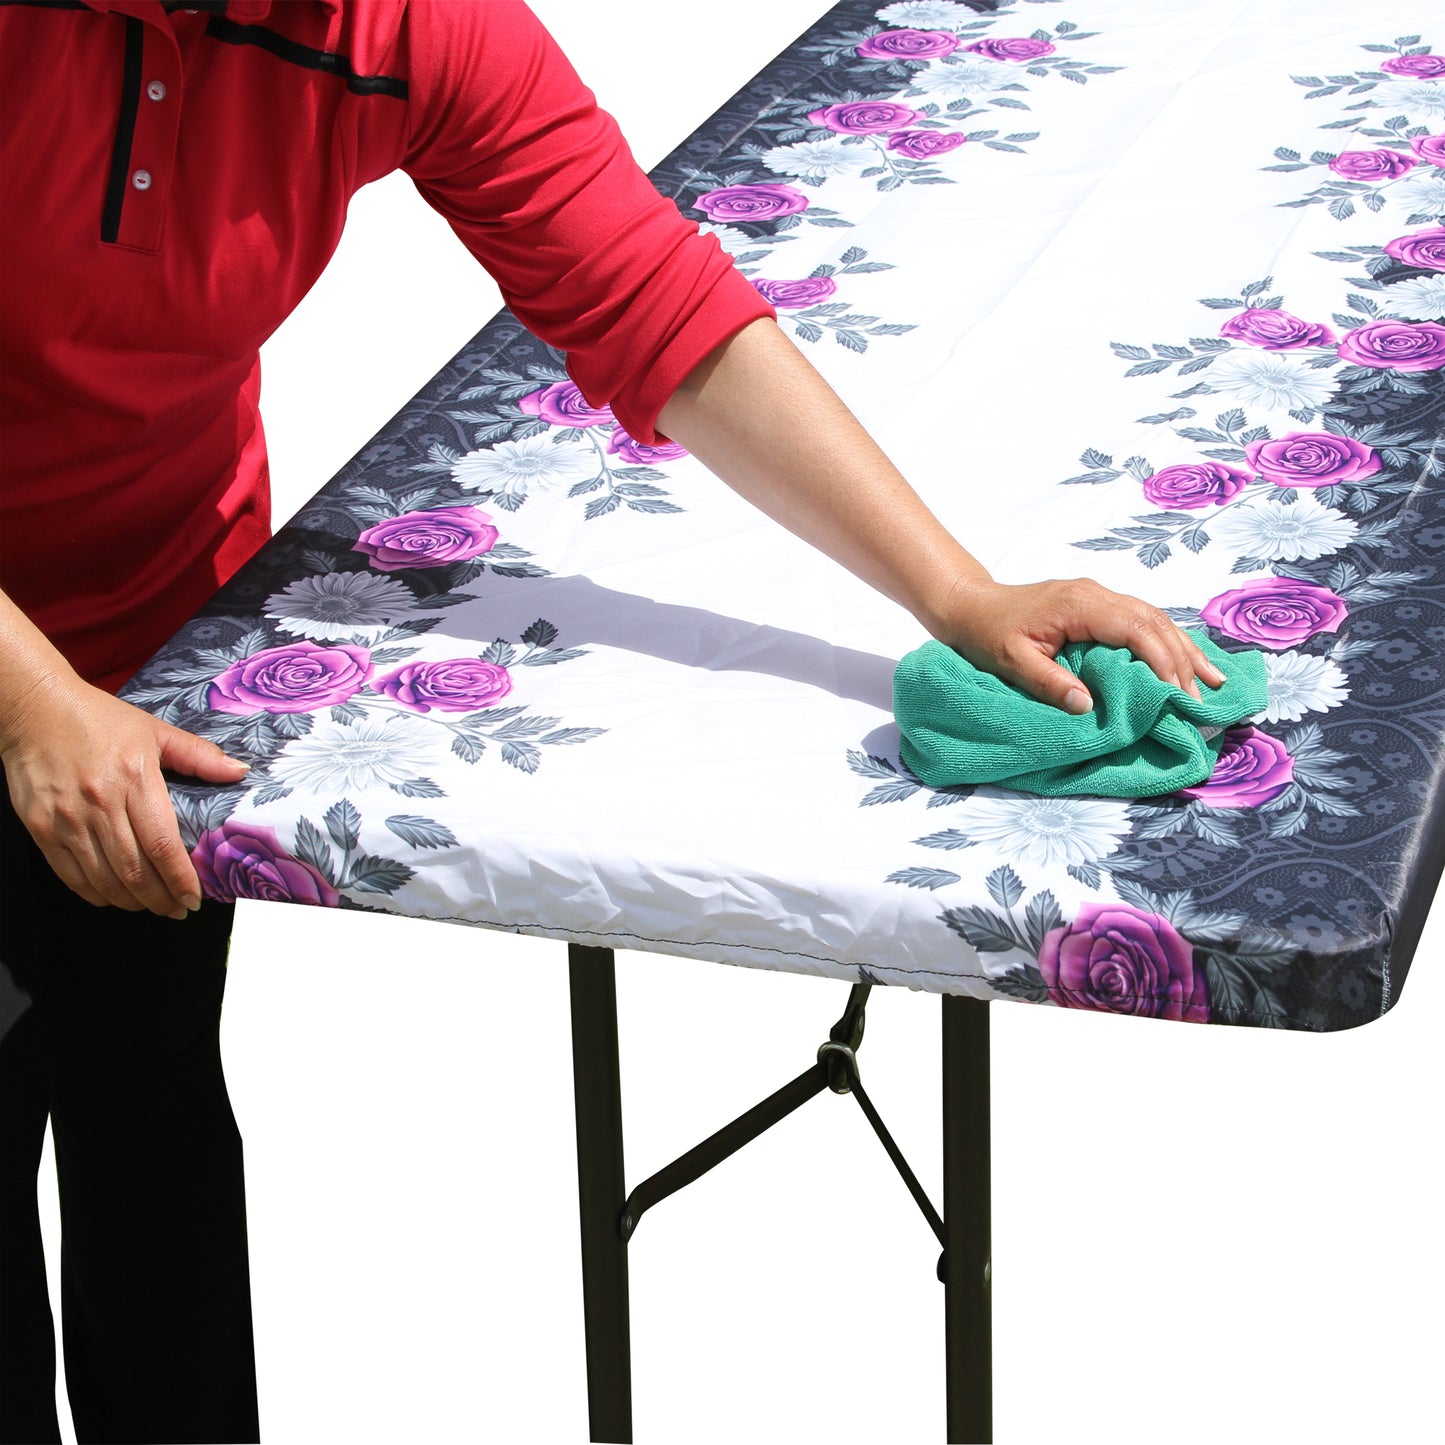 TableCloth PLUS 72" Roses Fitted Polyester Tablecloth for 6' Folding Tables is easy to clean, water proof, easy to install, and has an elastic rim